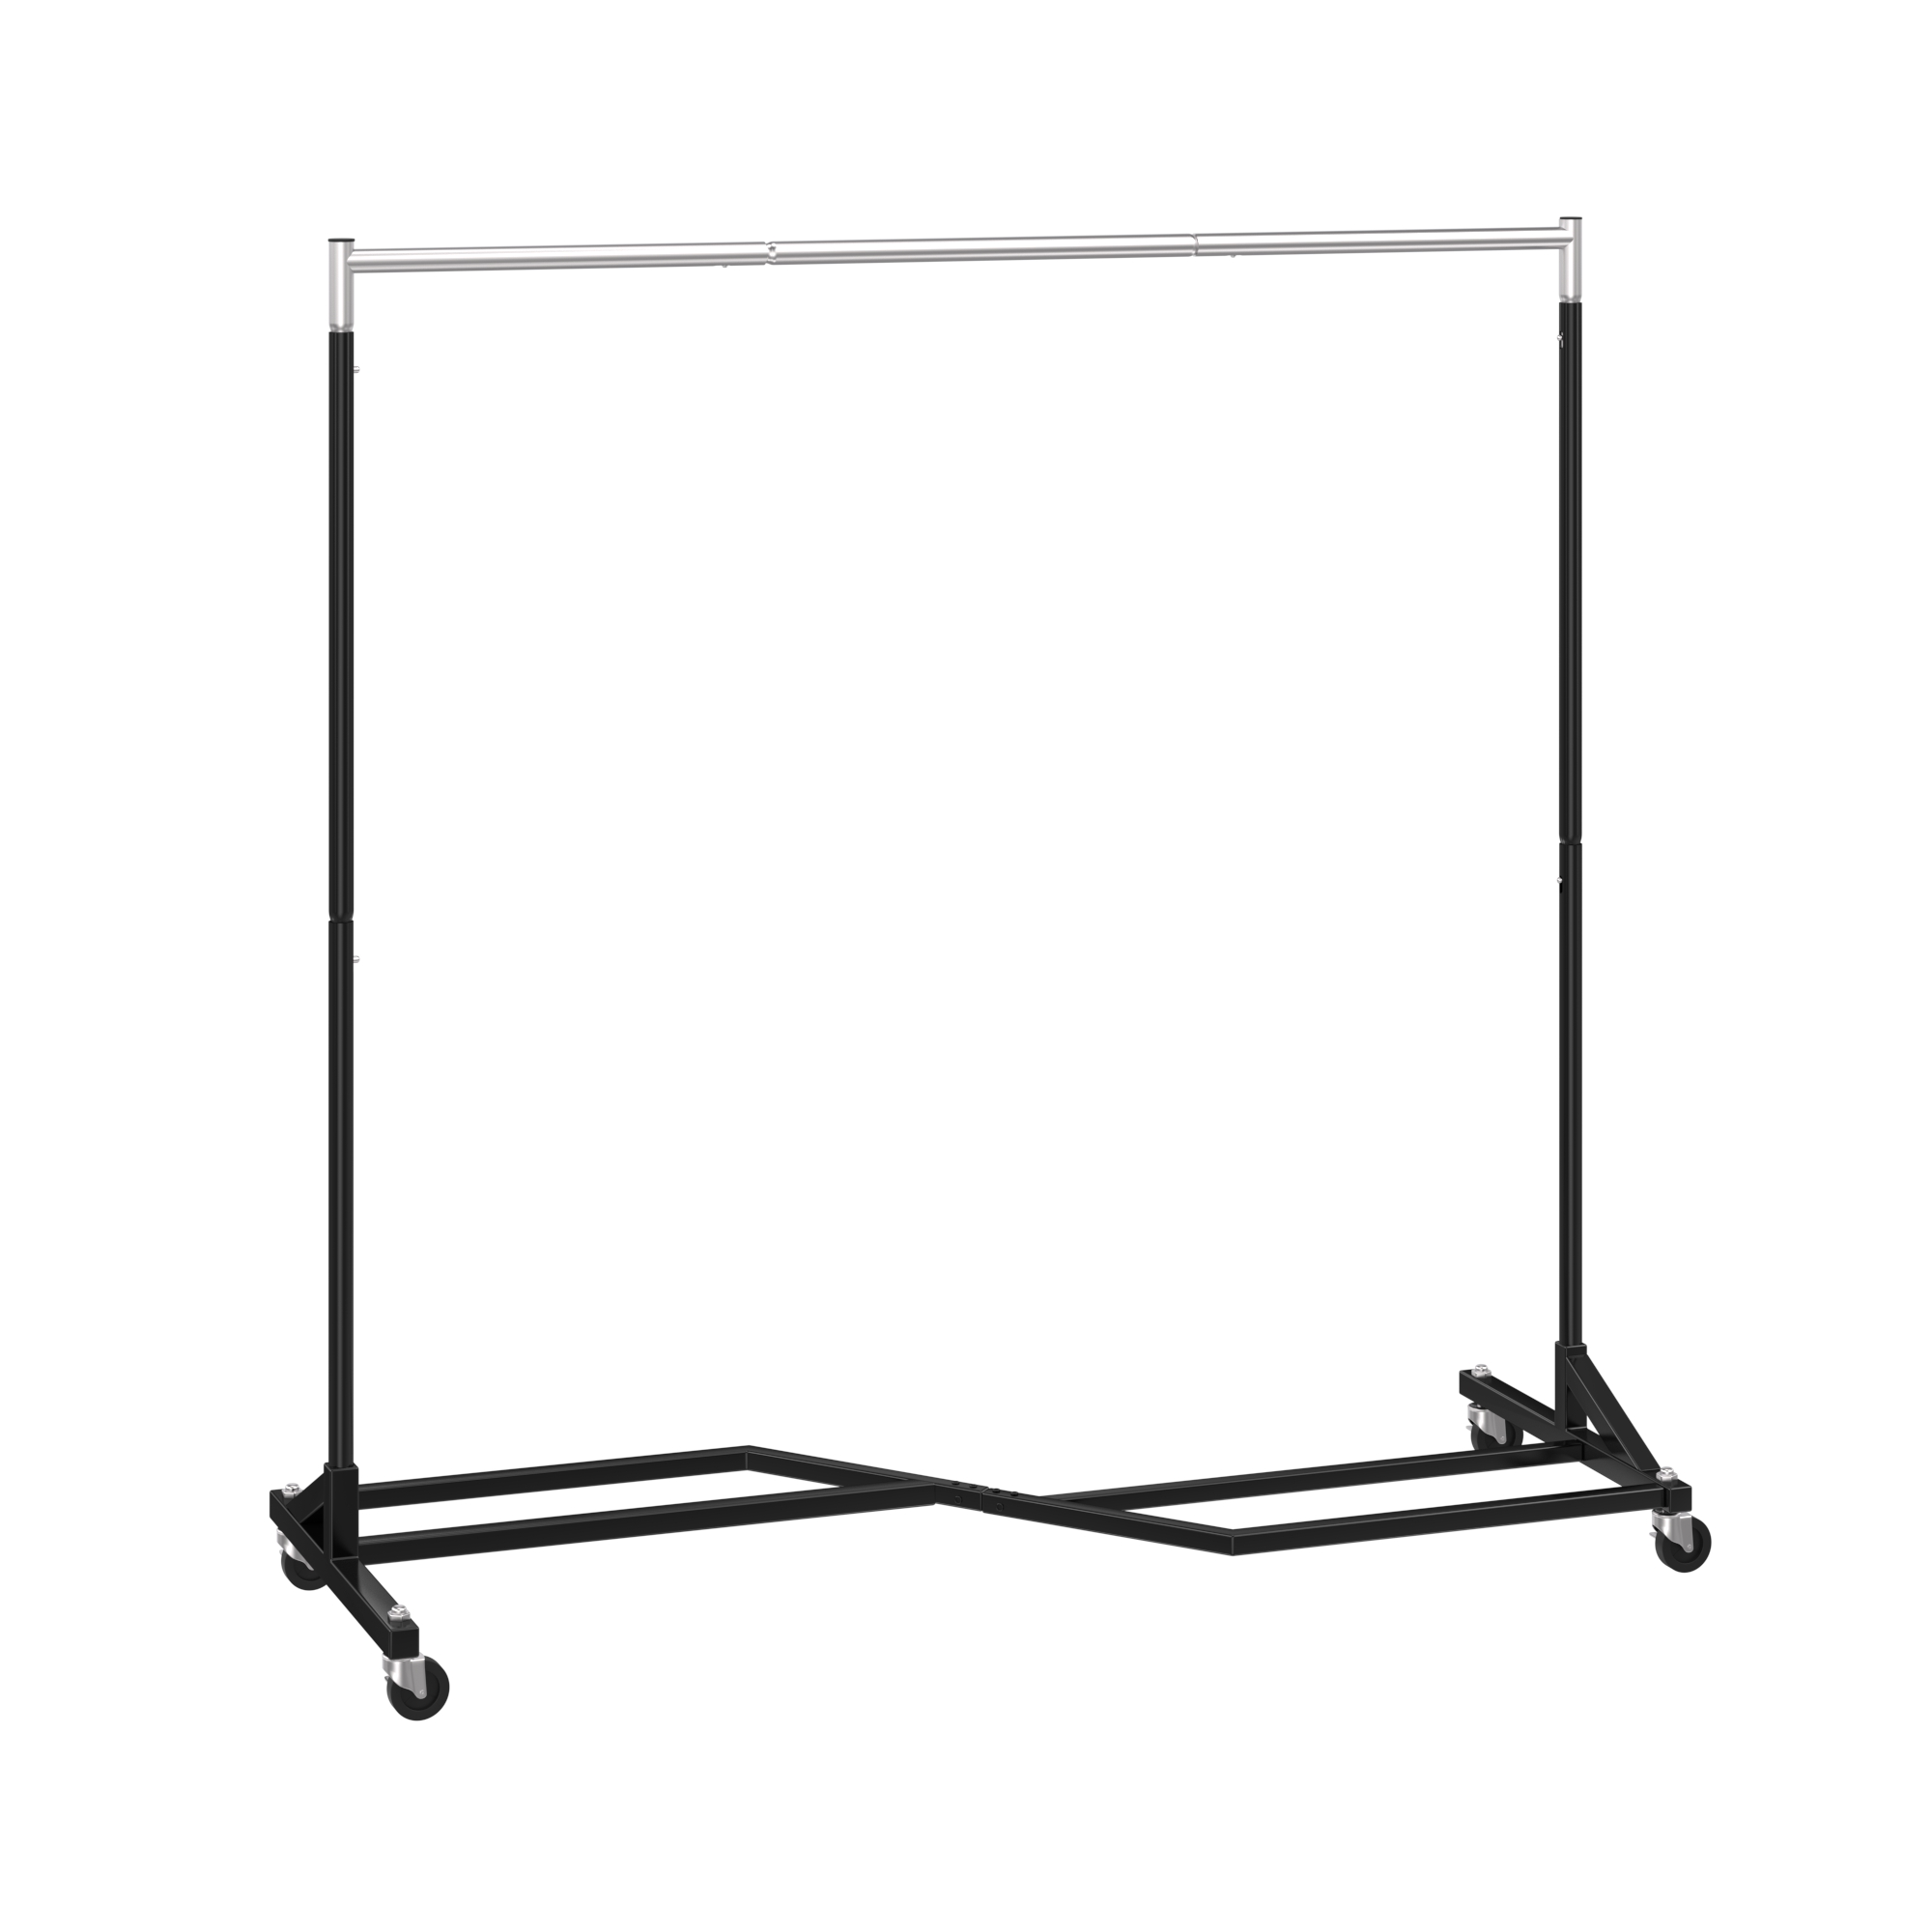 Mr IRONSTONE 400 lbs Heavy Duty Garment Rack, Rolling Clothes Hanger Rack  with Wheels, Home Portable Bedroom Closet Clothing Rack, Black 